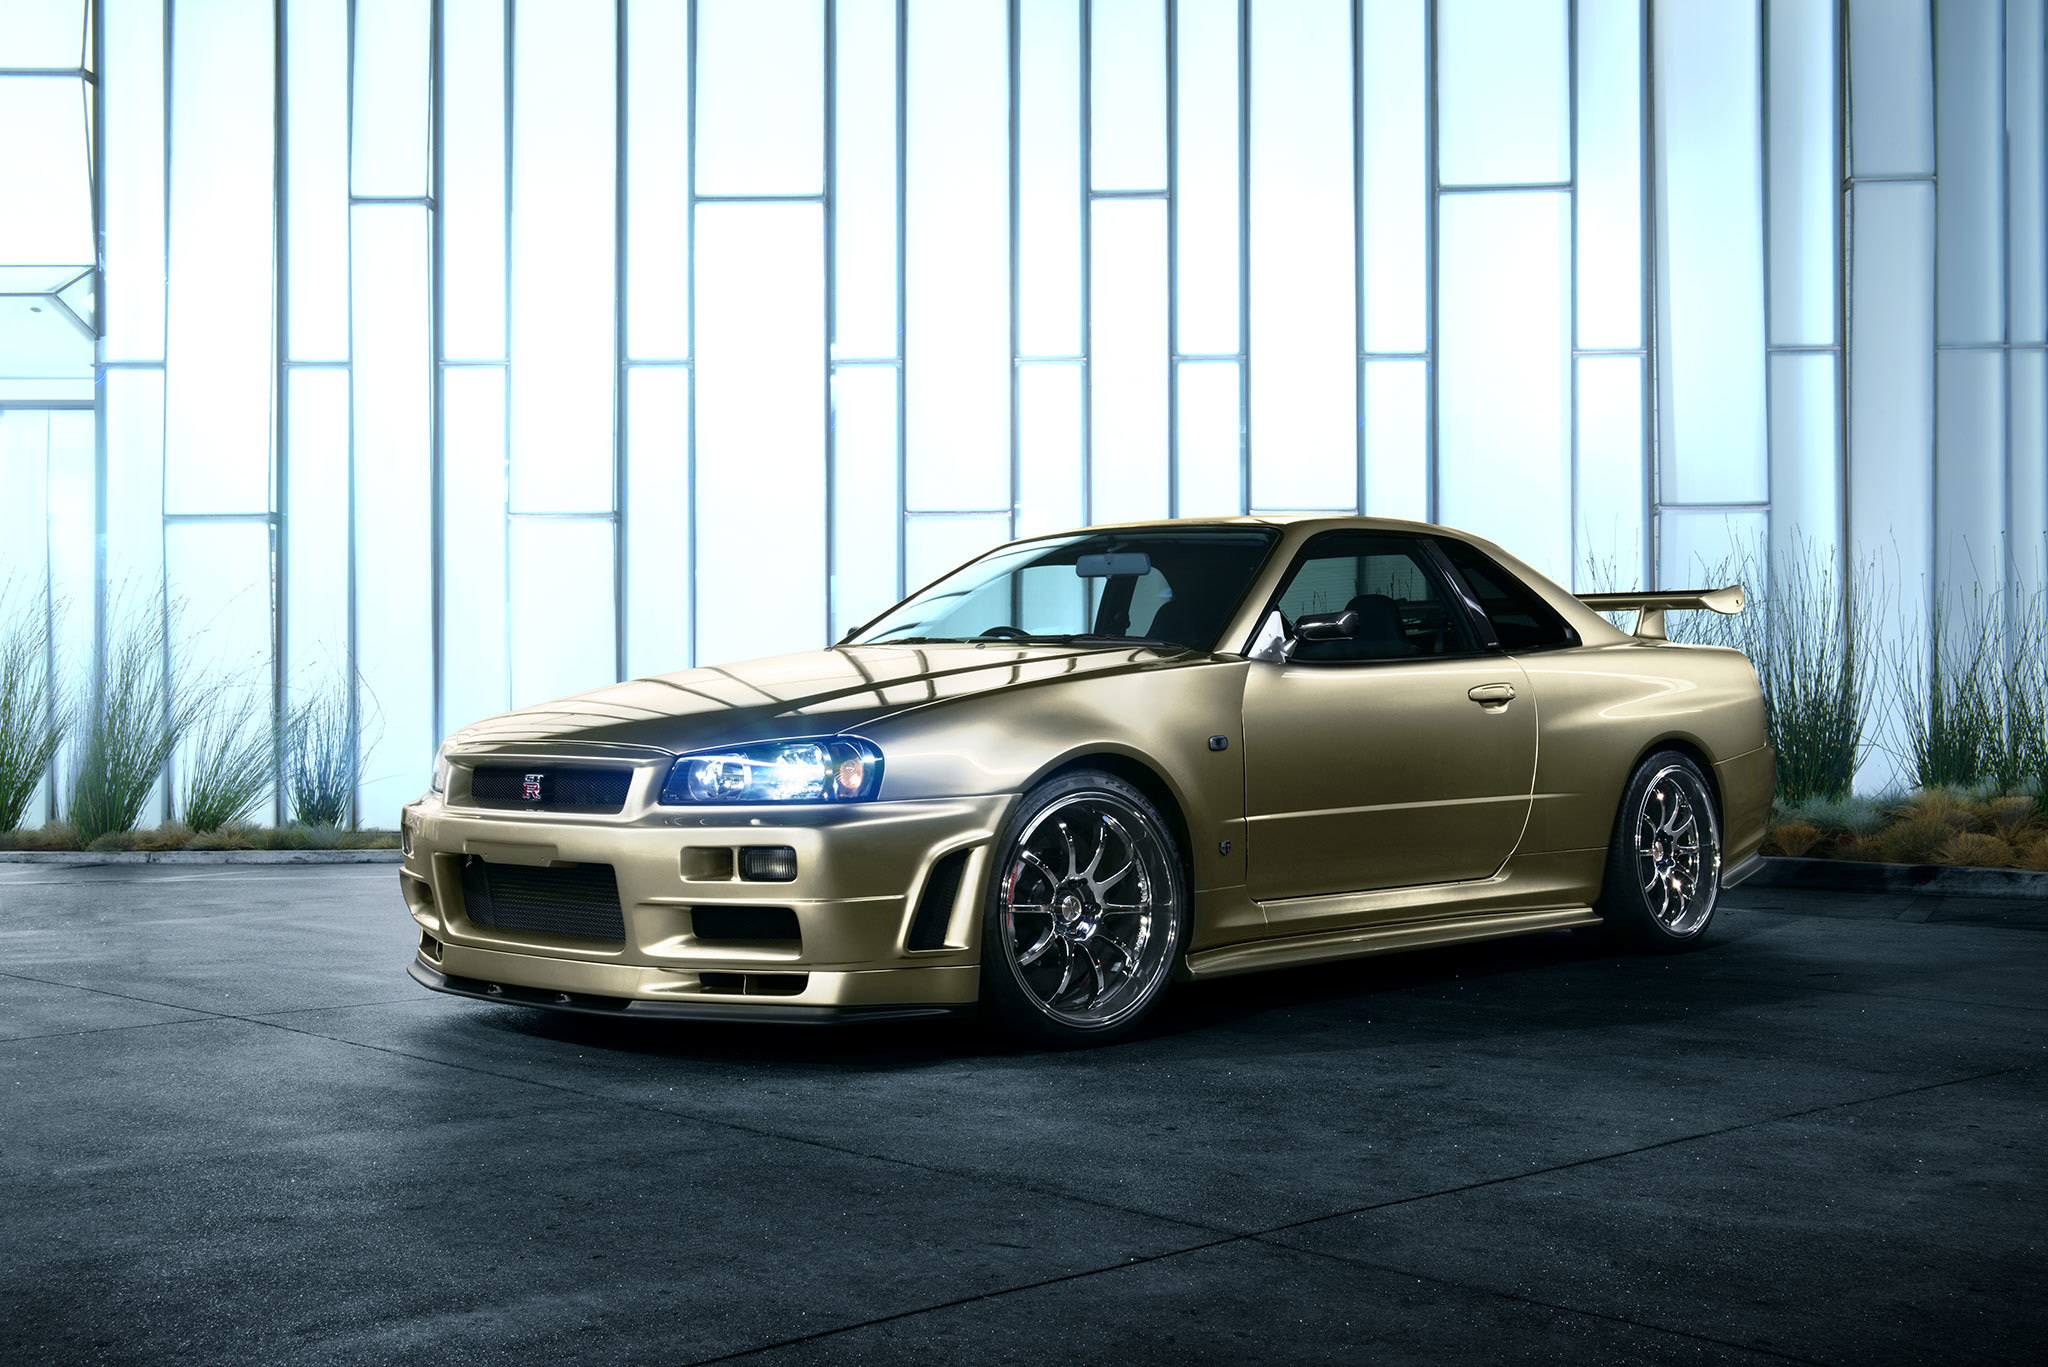 Mobile wallpaper: Nissan Skyline, R34, Golden, Side View, Cars, 157338  download the picture for free.